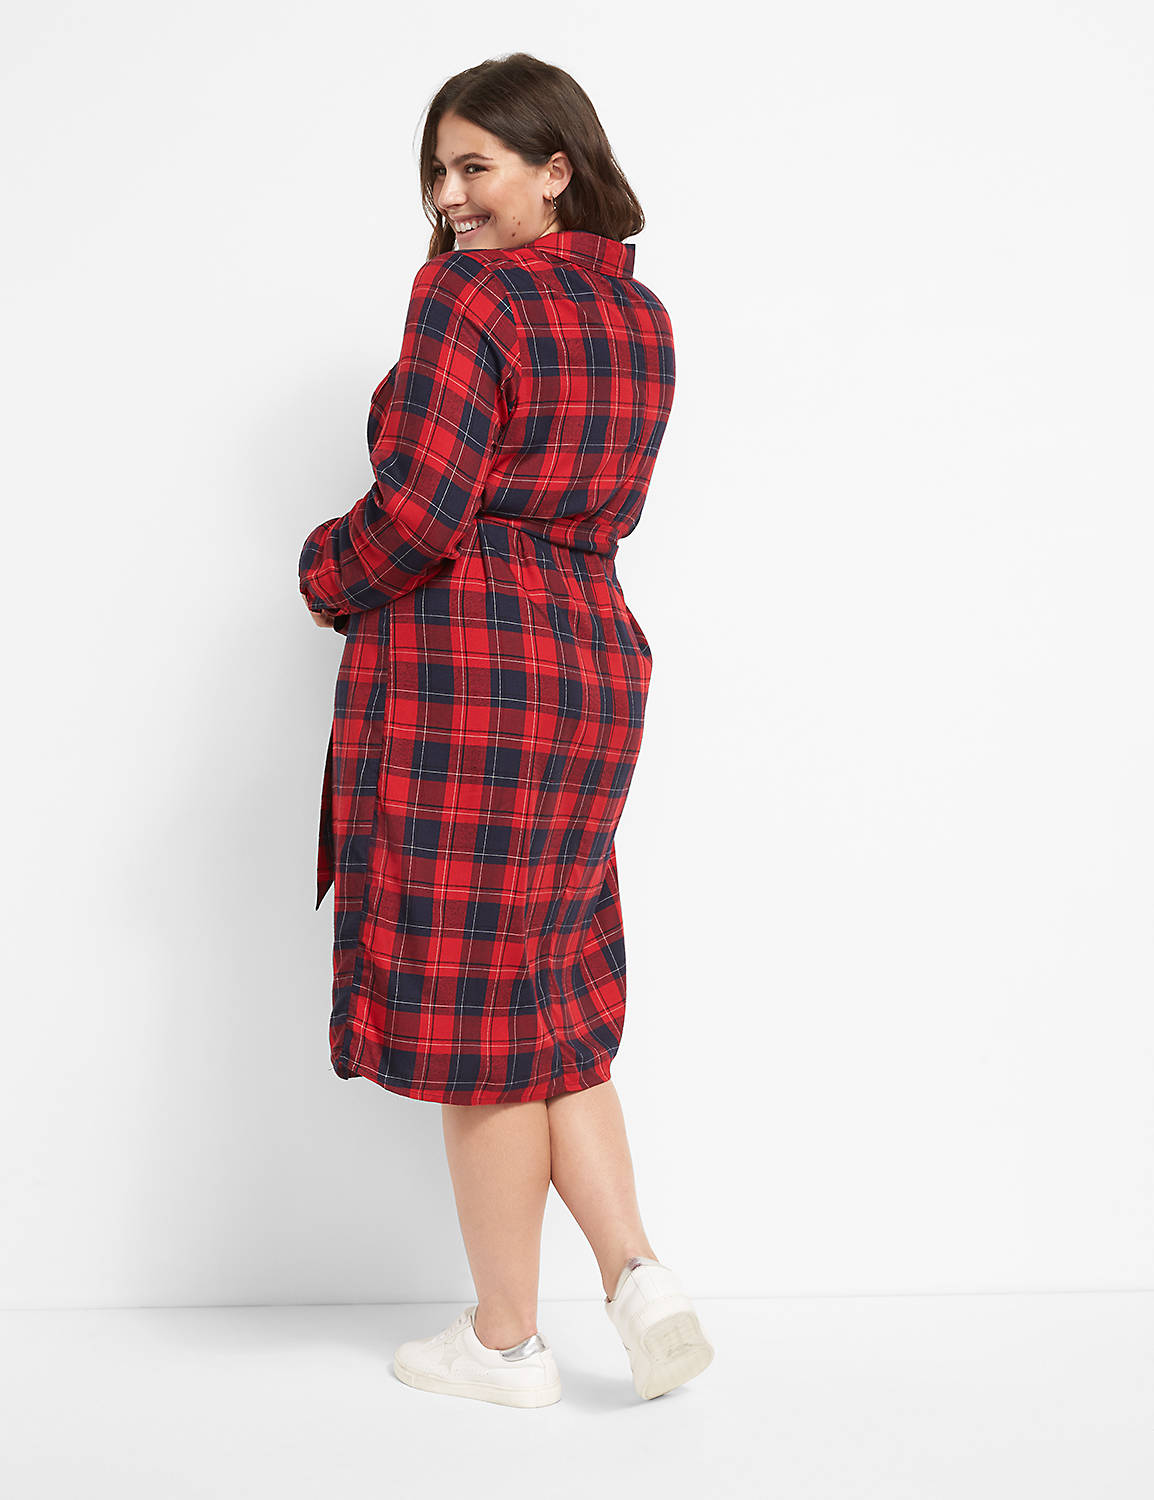 Long Sleeve Button Down Belted Shirt Dress 1124664:LBH21071_IcelandPlaid_CW14:20 Product Image 2